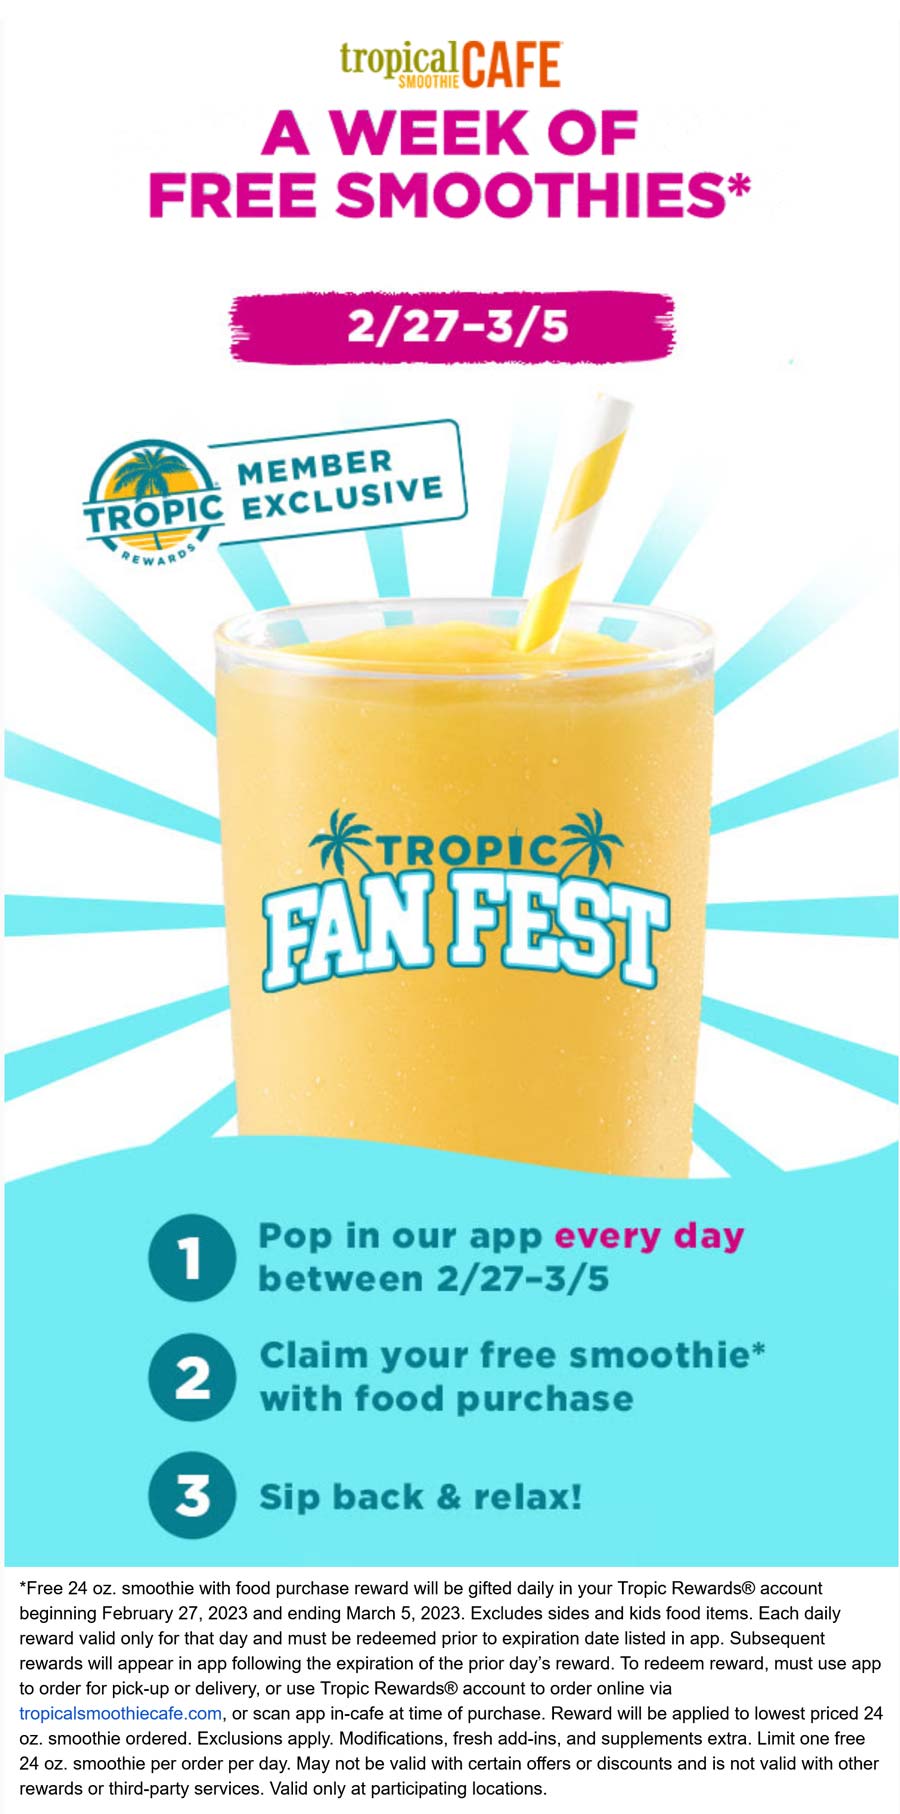 Tropical Smoothie Cafe restaurants Coupon  Free 24oz smoothie with food purchase daily at Tropical Smoothie Cafe #tropicalsmoothiecafe 